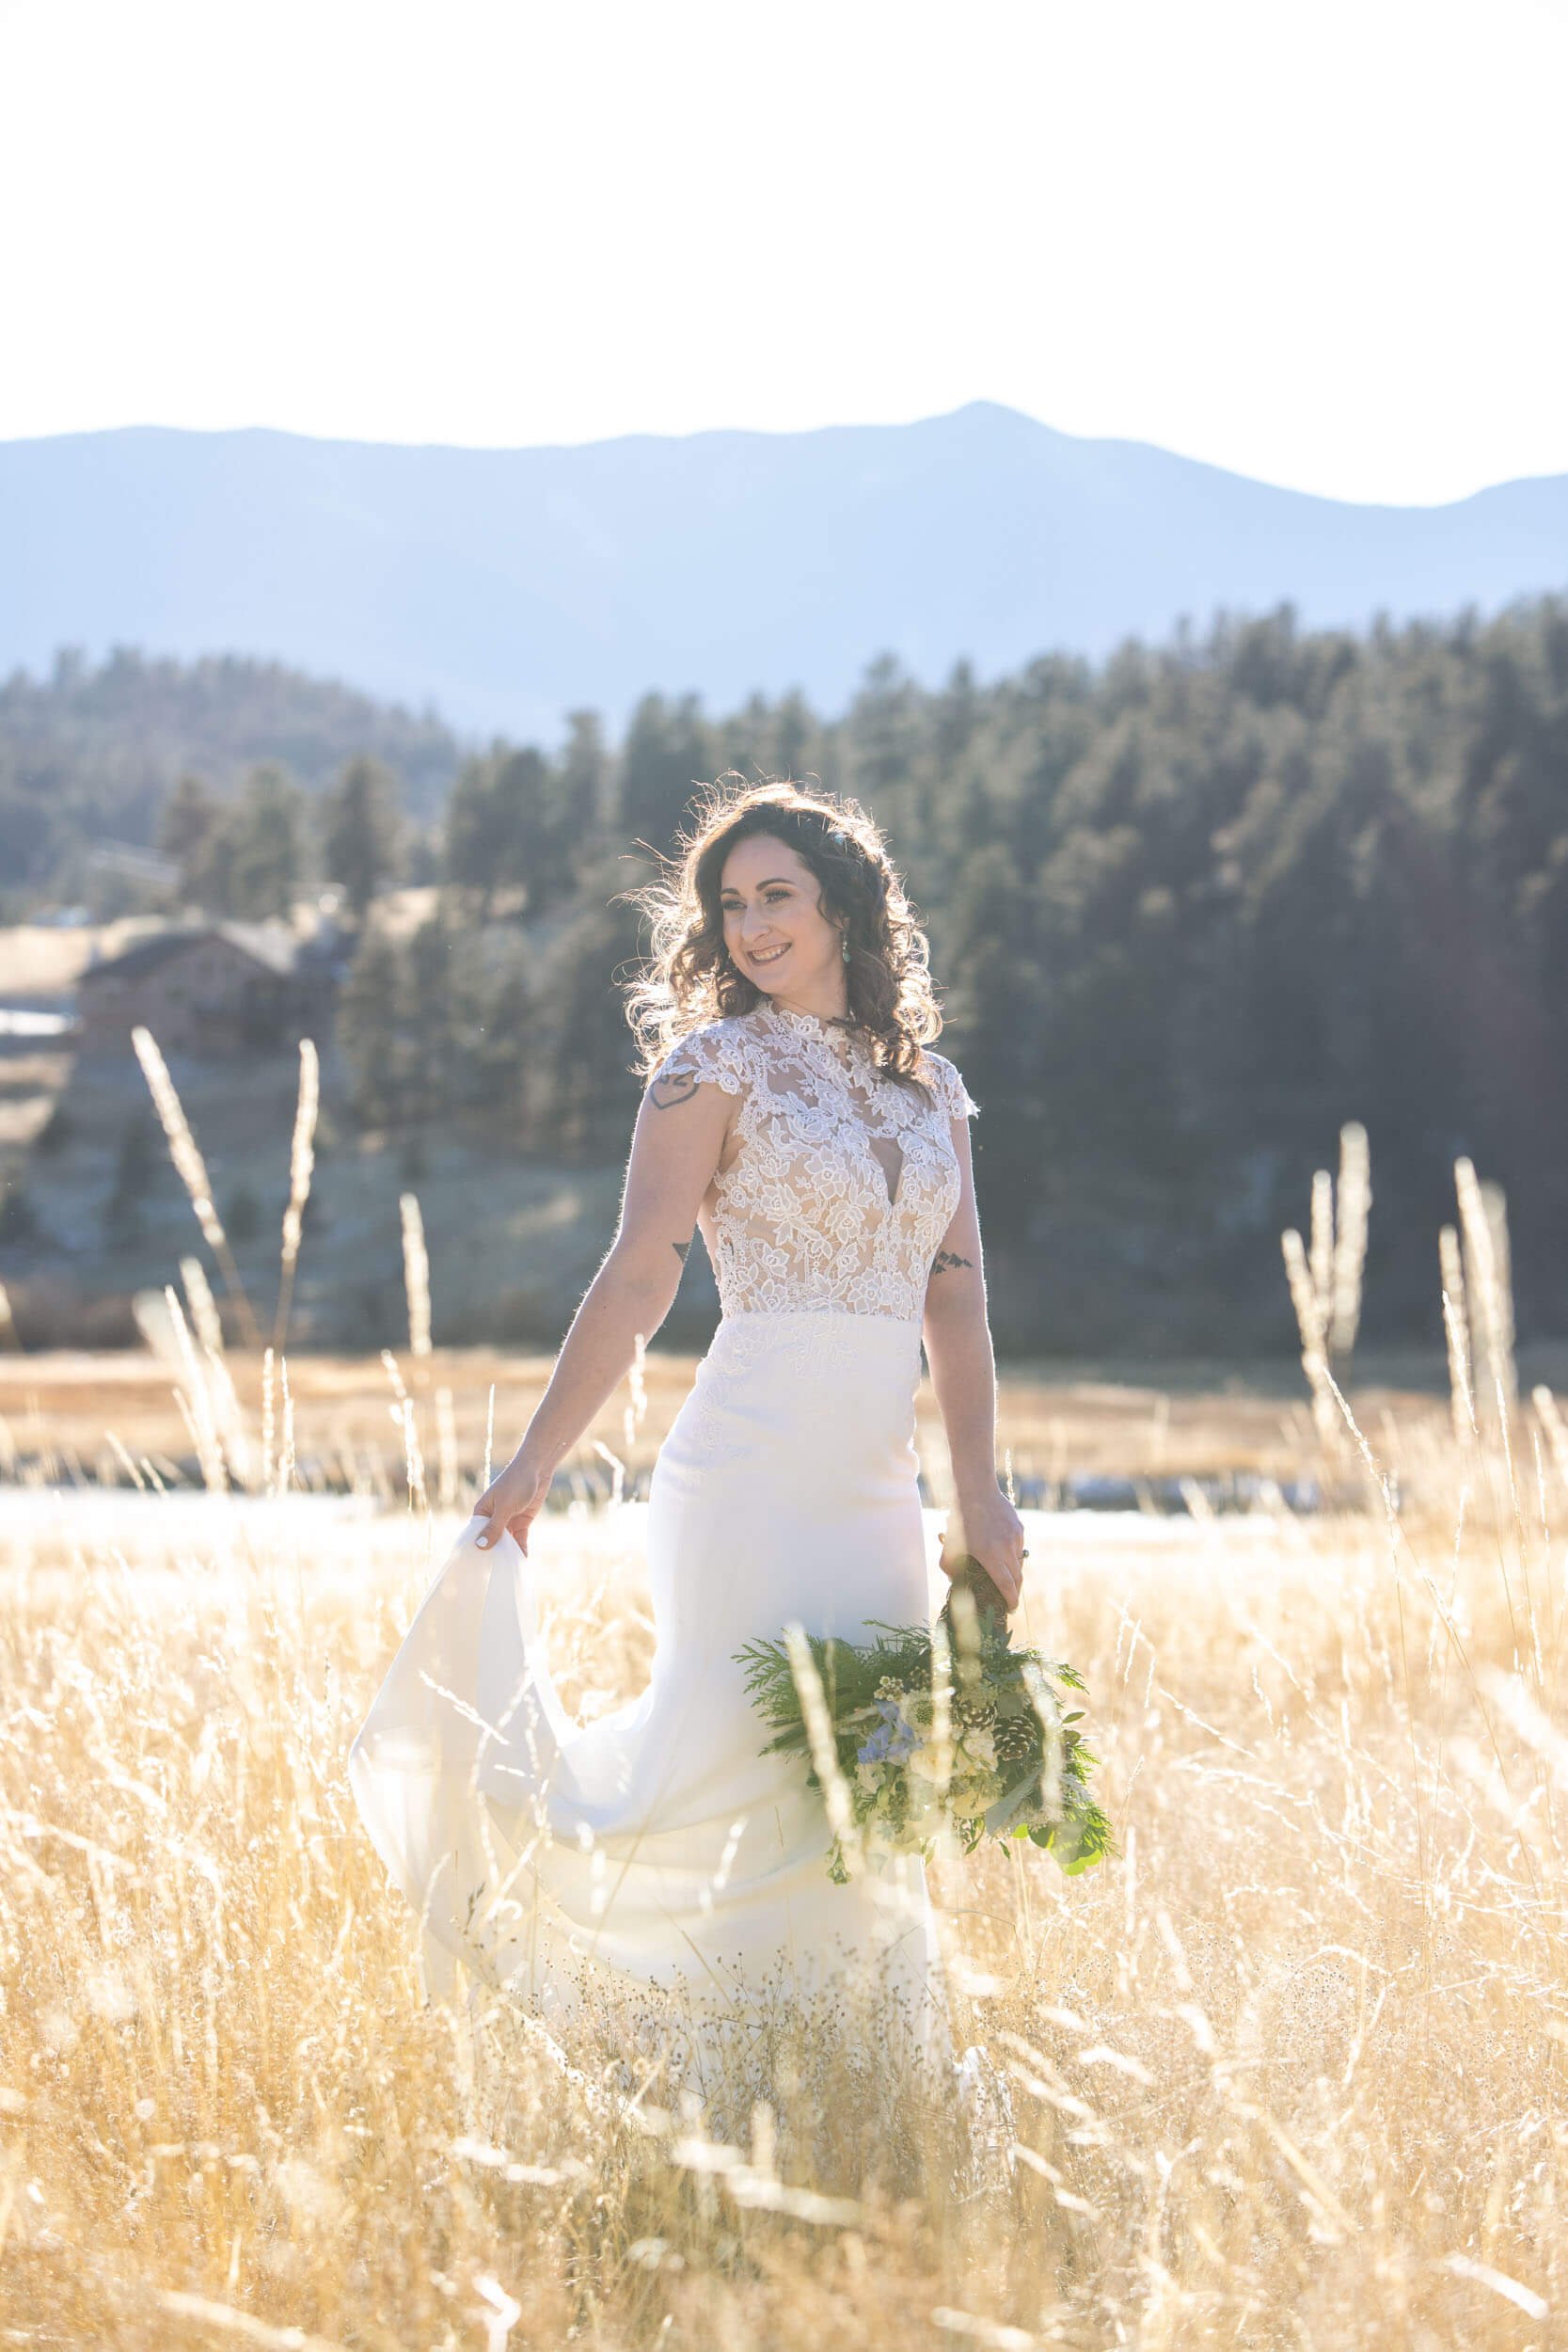 Bride in a field with mountain views